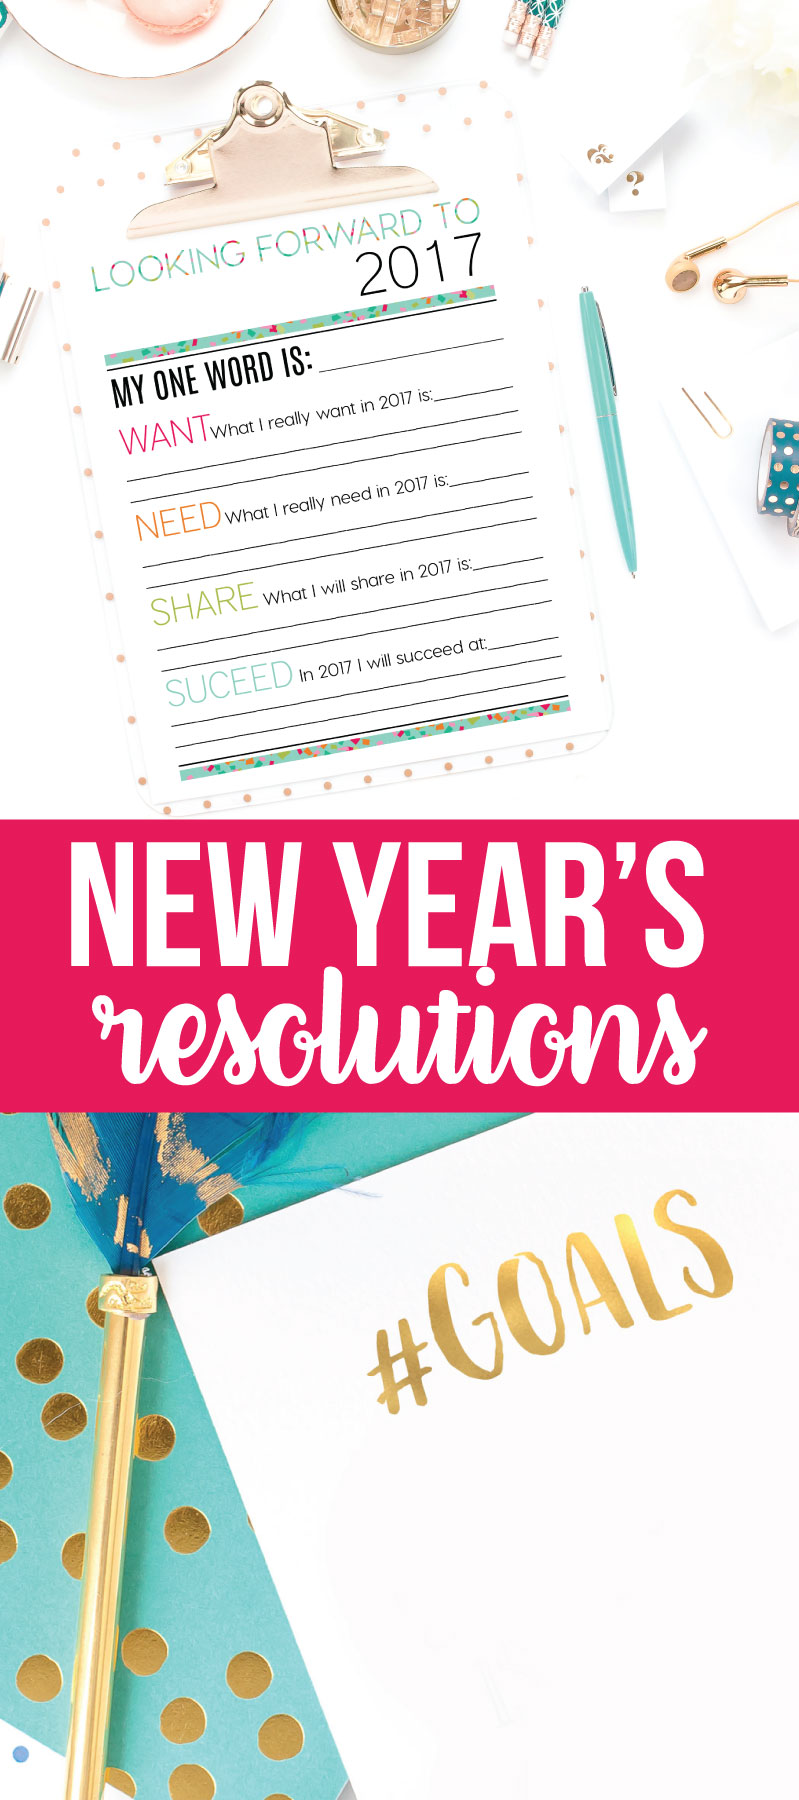 Holidays: Looking Forward to 2017 - New Year's Eve Resolutions Printable from thirtyhandmadedays.com